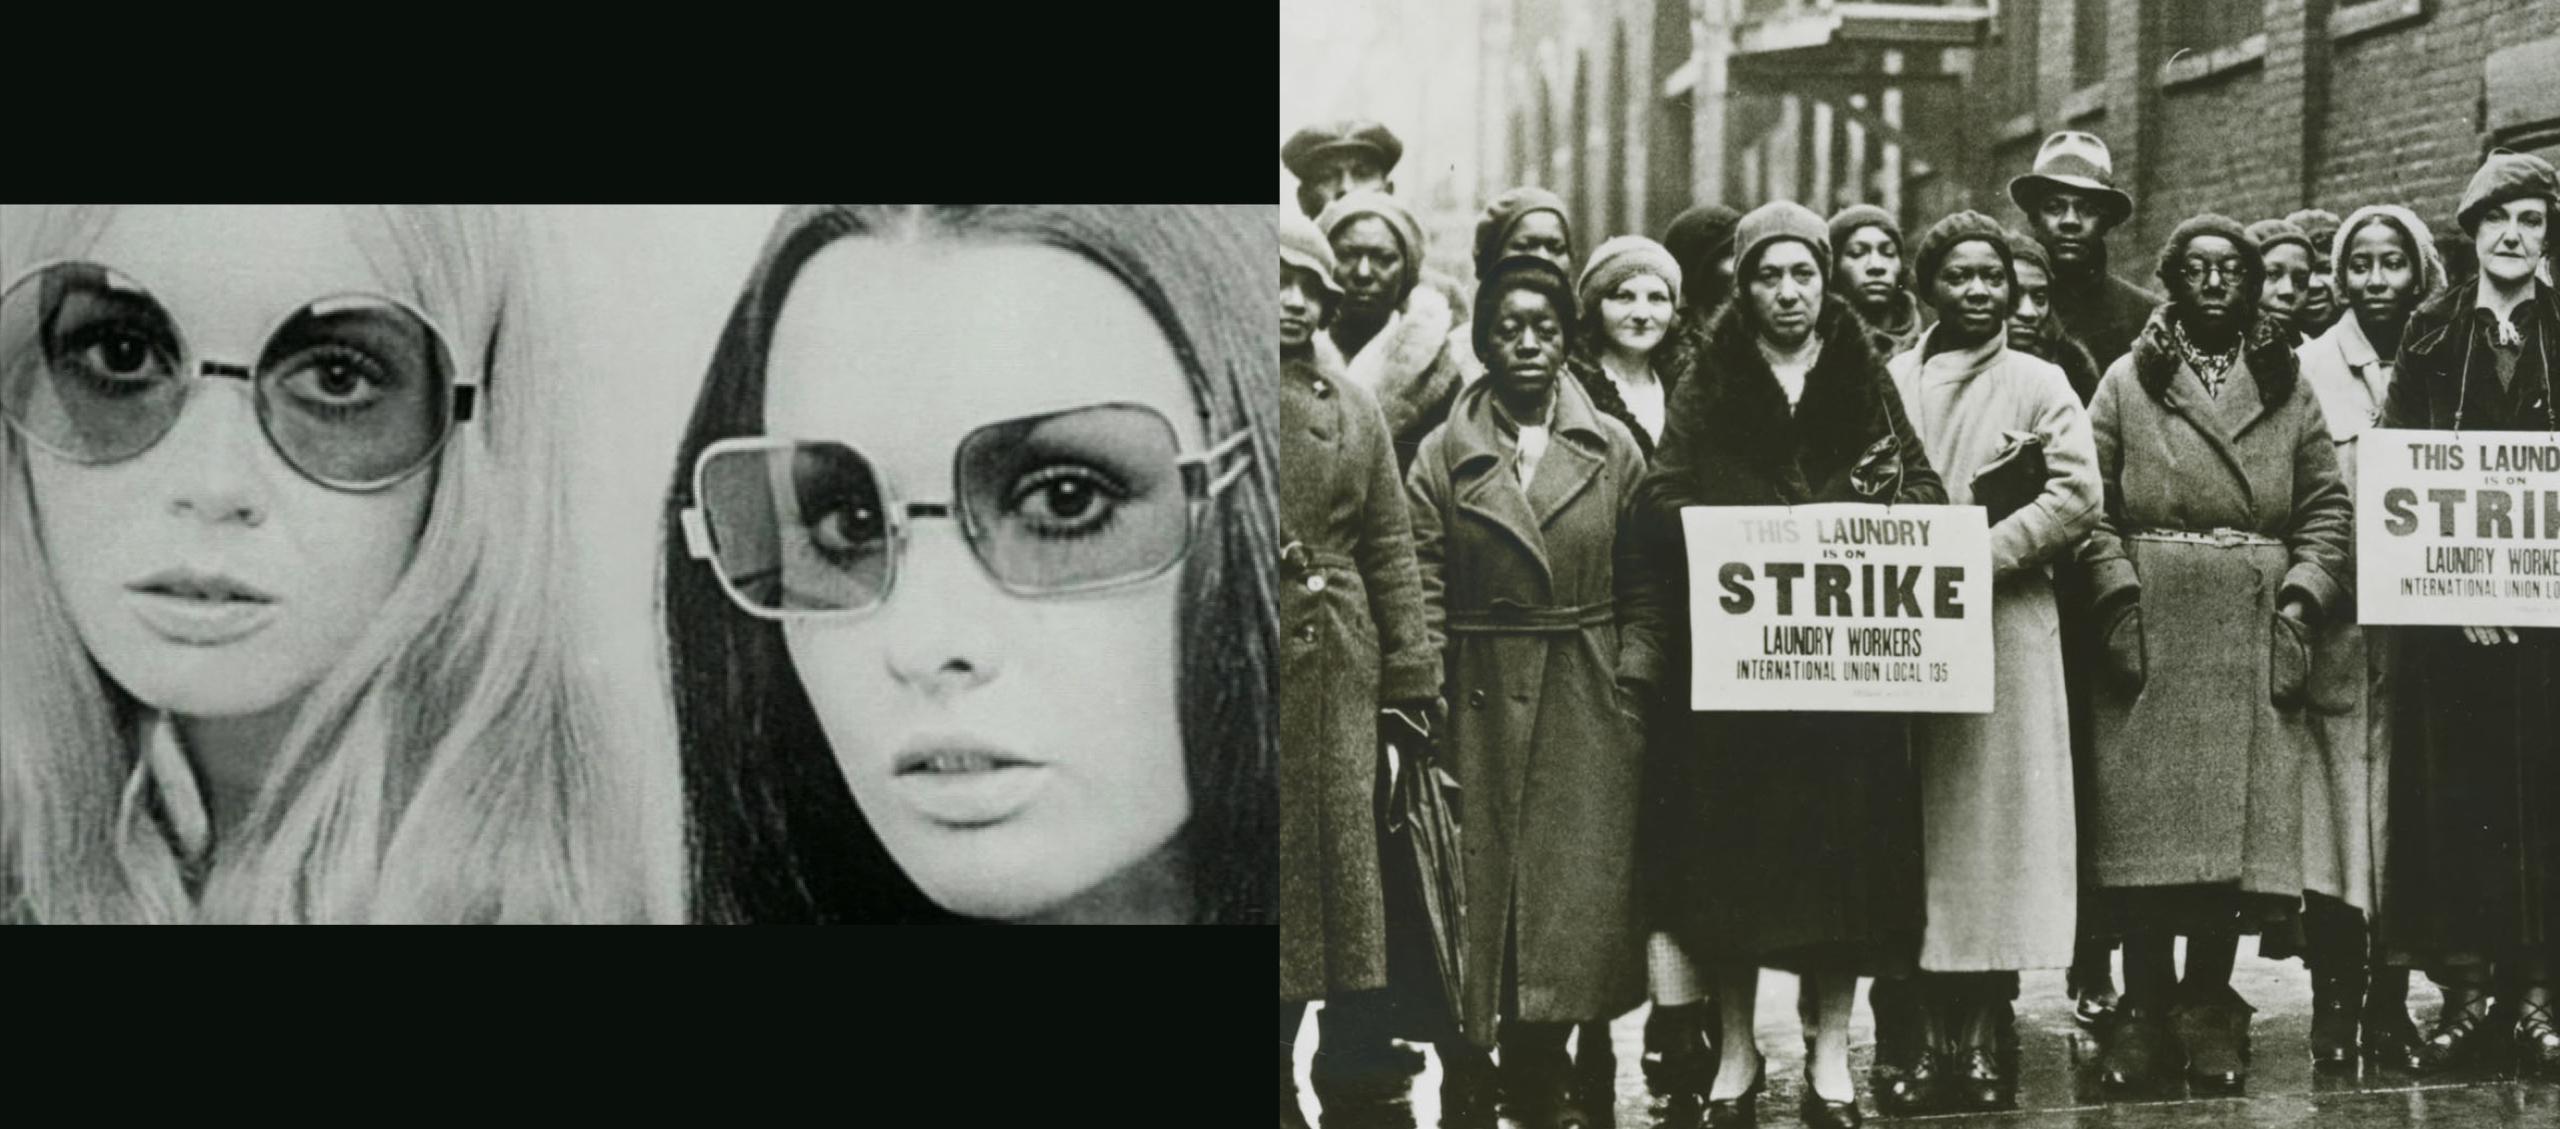 On the left is a black-and-white, close-up photo of two women wearing large sunglasses. On the right is a black-and-white photo of people on strike.